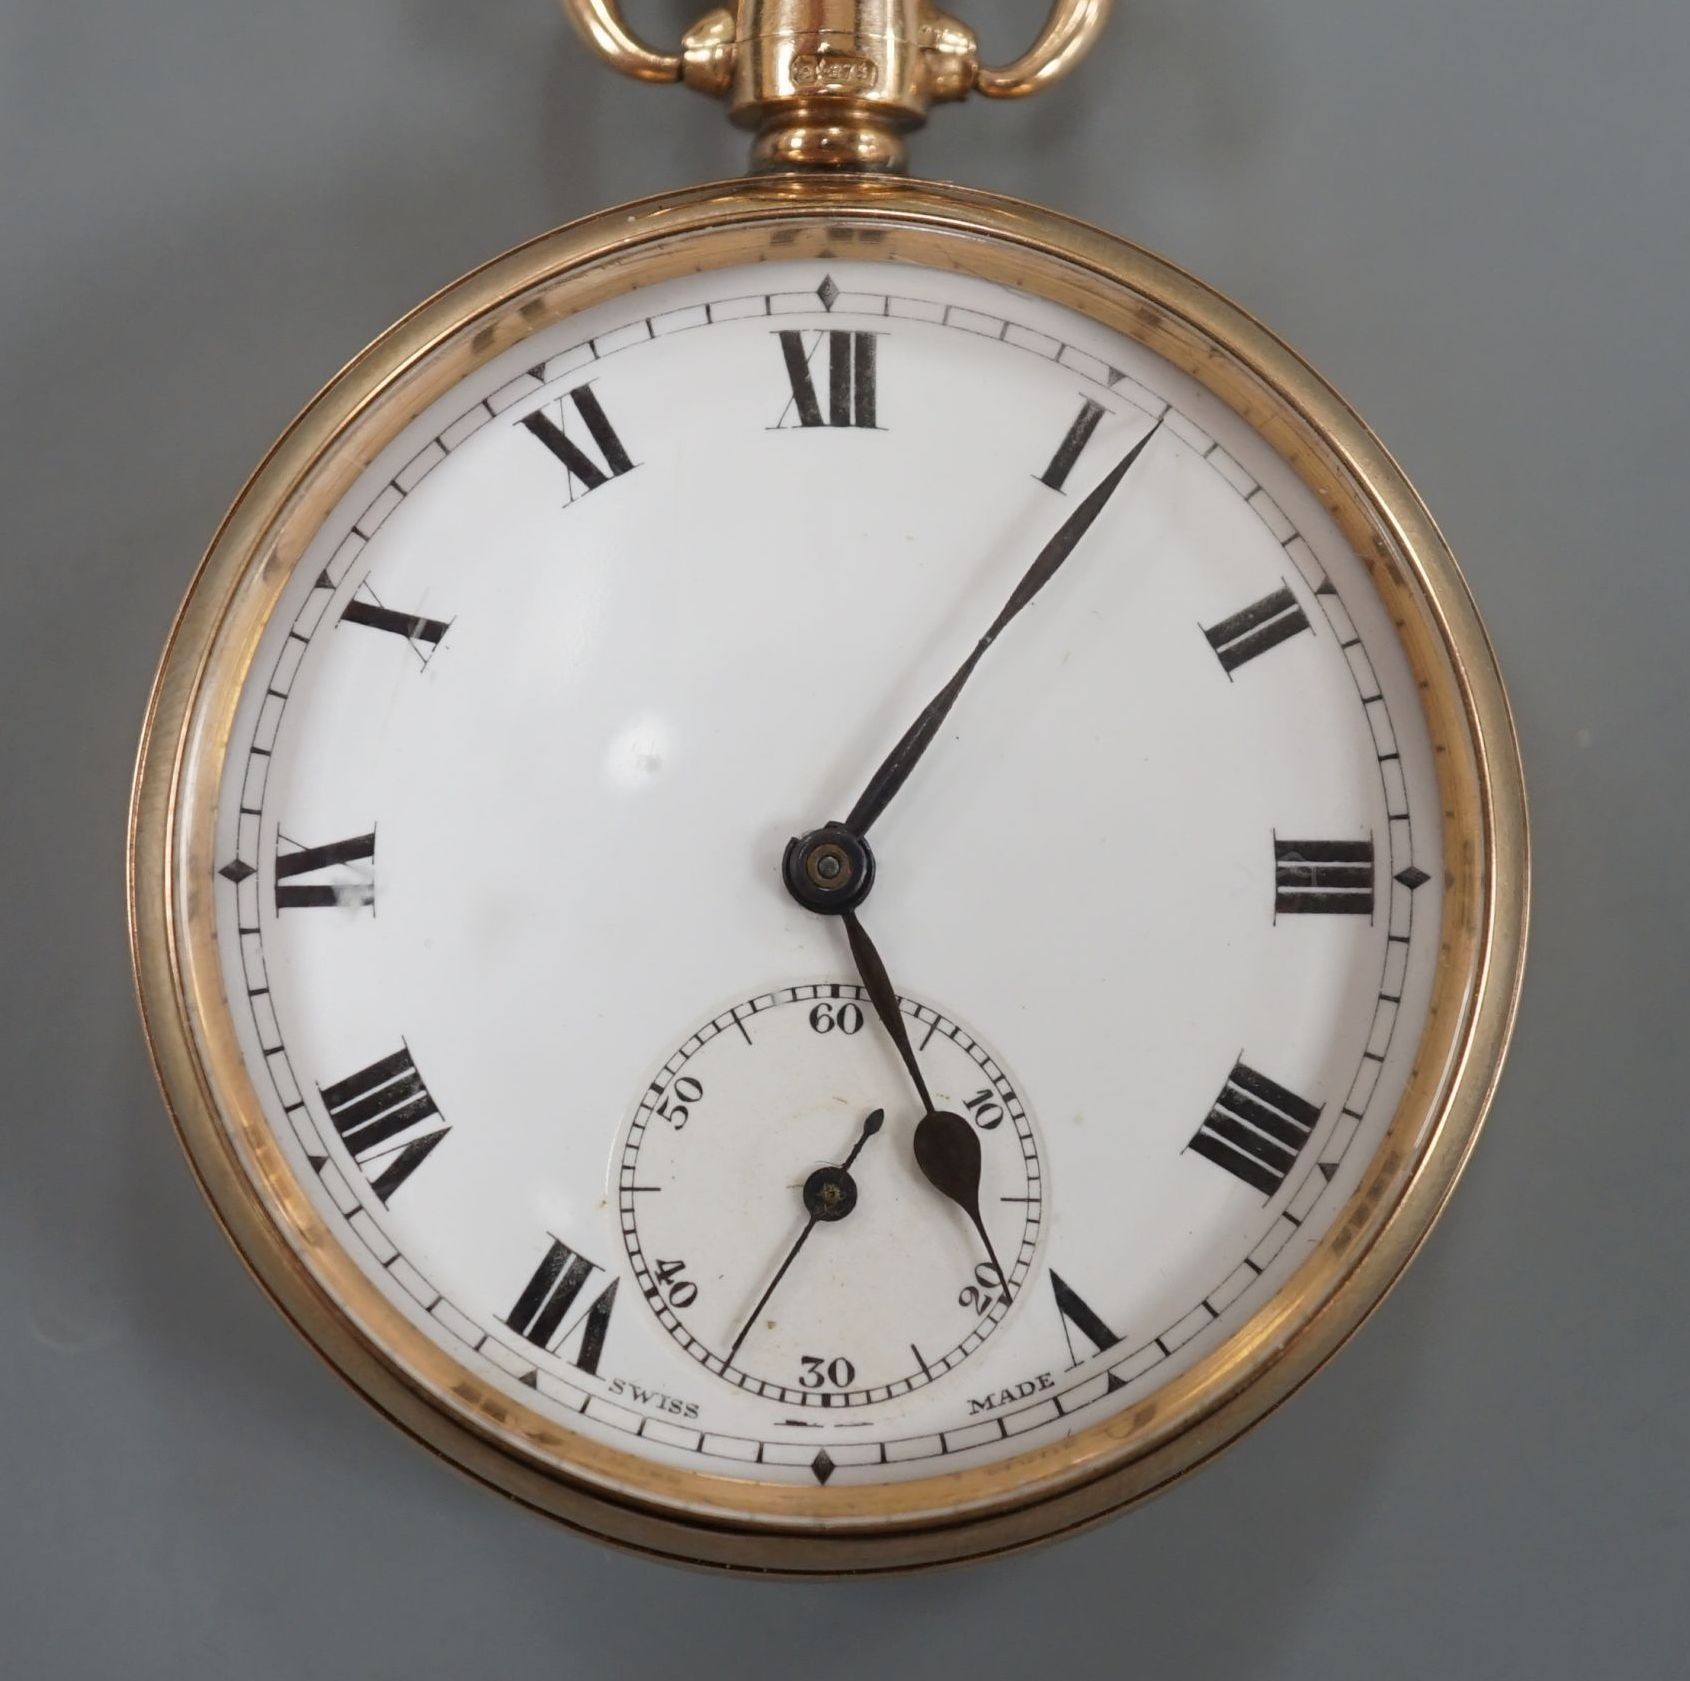 A George V 9ct gold Cyma open face keyless pocket watch, with Roman dial and subsidiary seconds, case diameter 48mm, gross weight 74.2 grams.